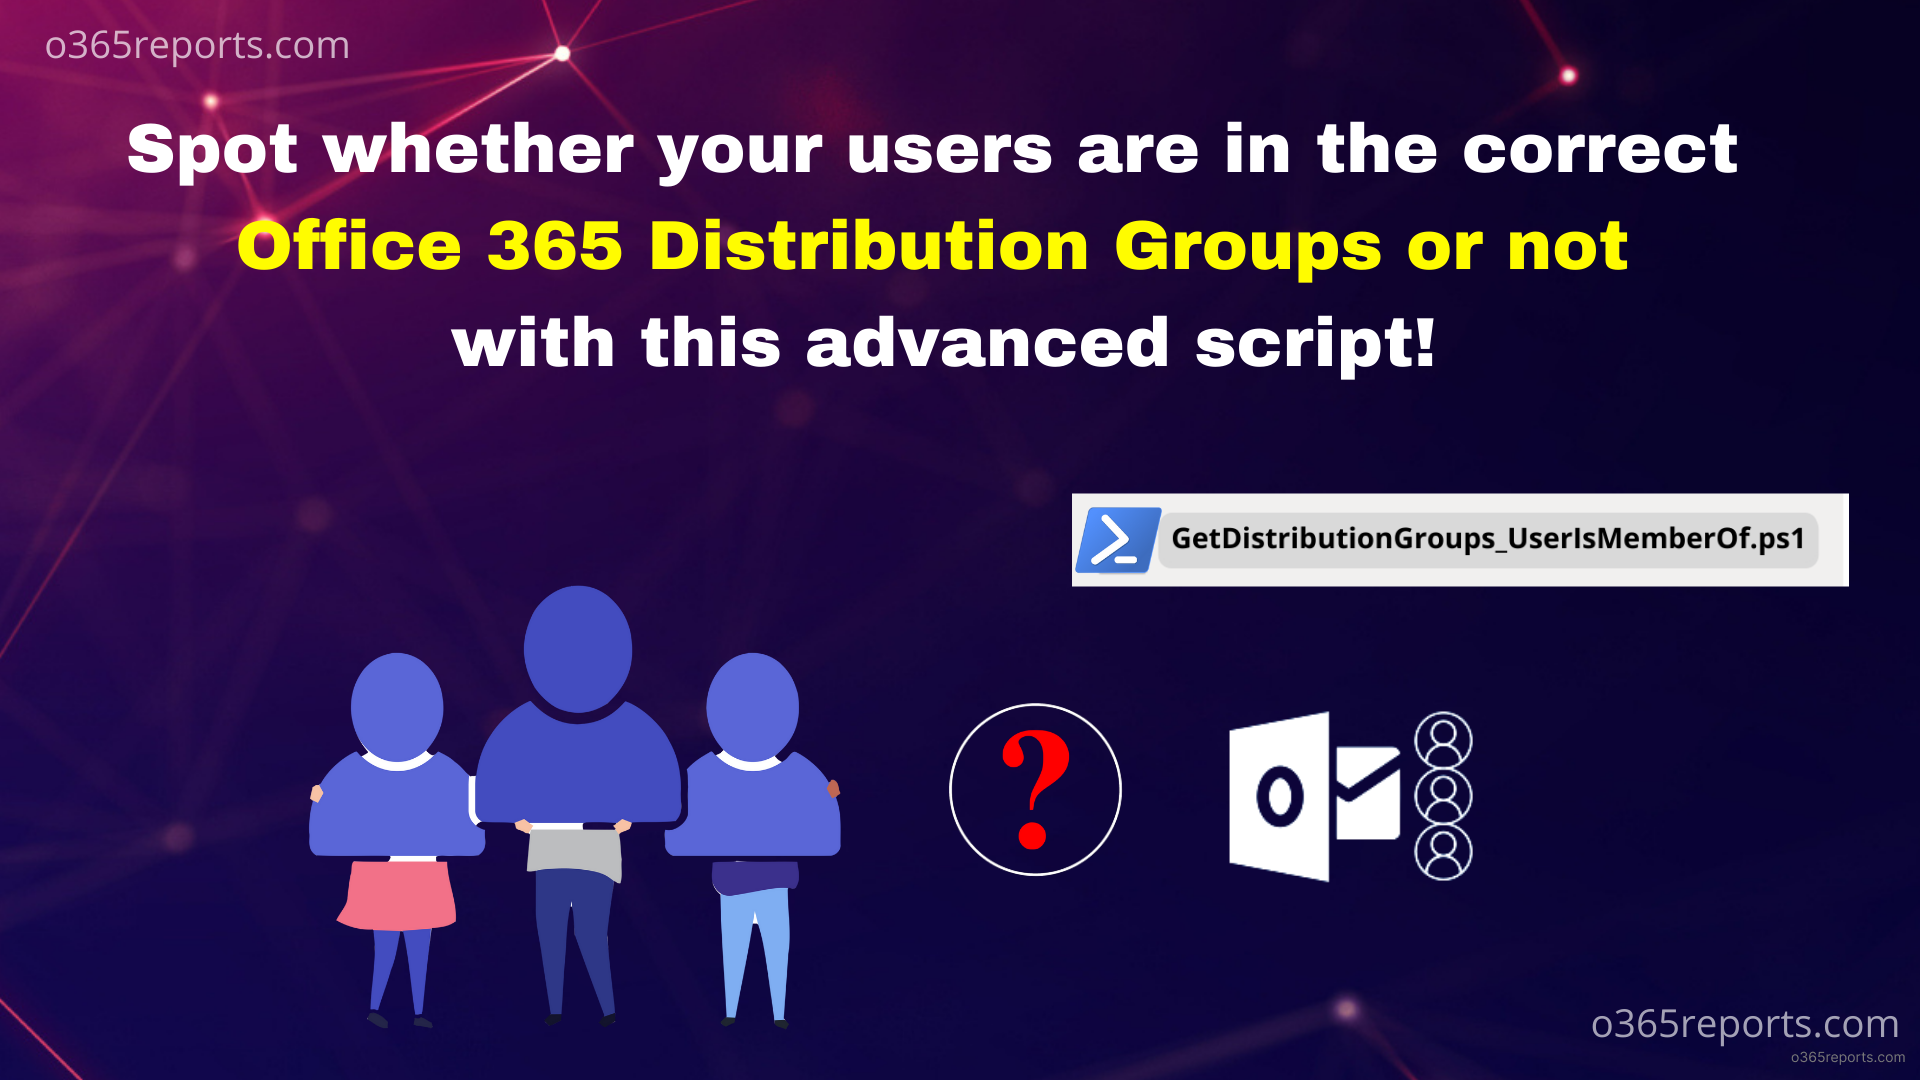 Distribution Groups a User Is Member Of